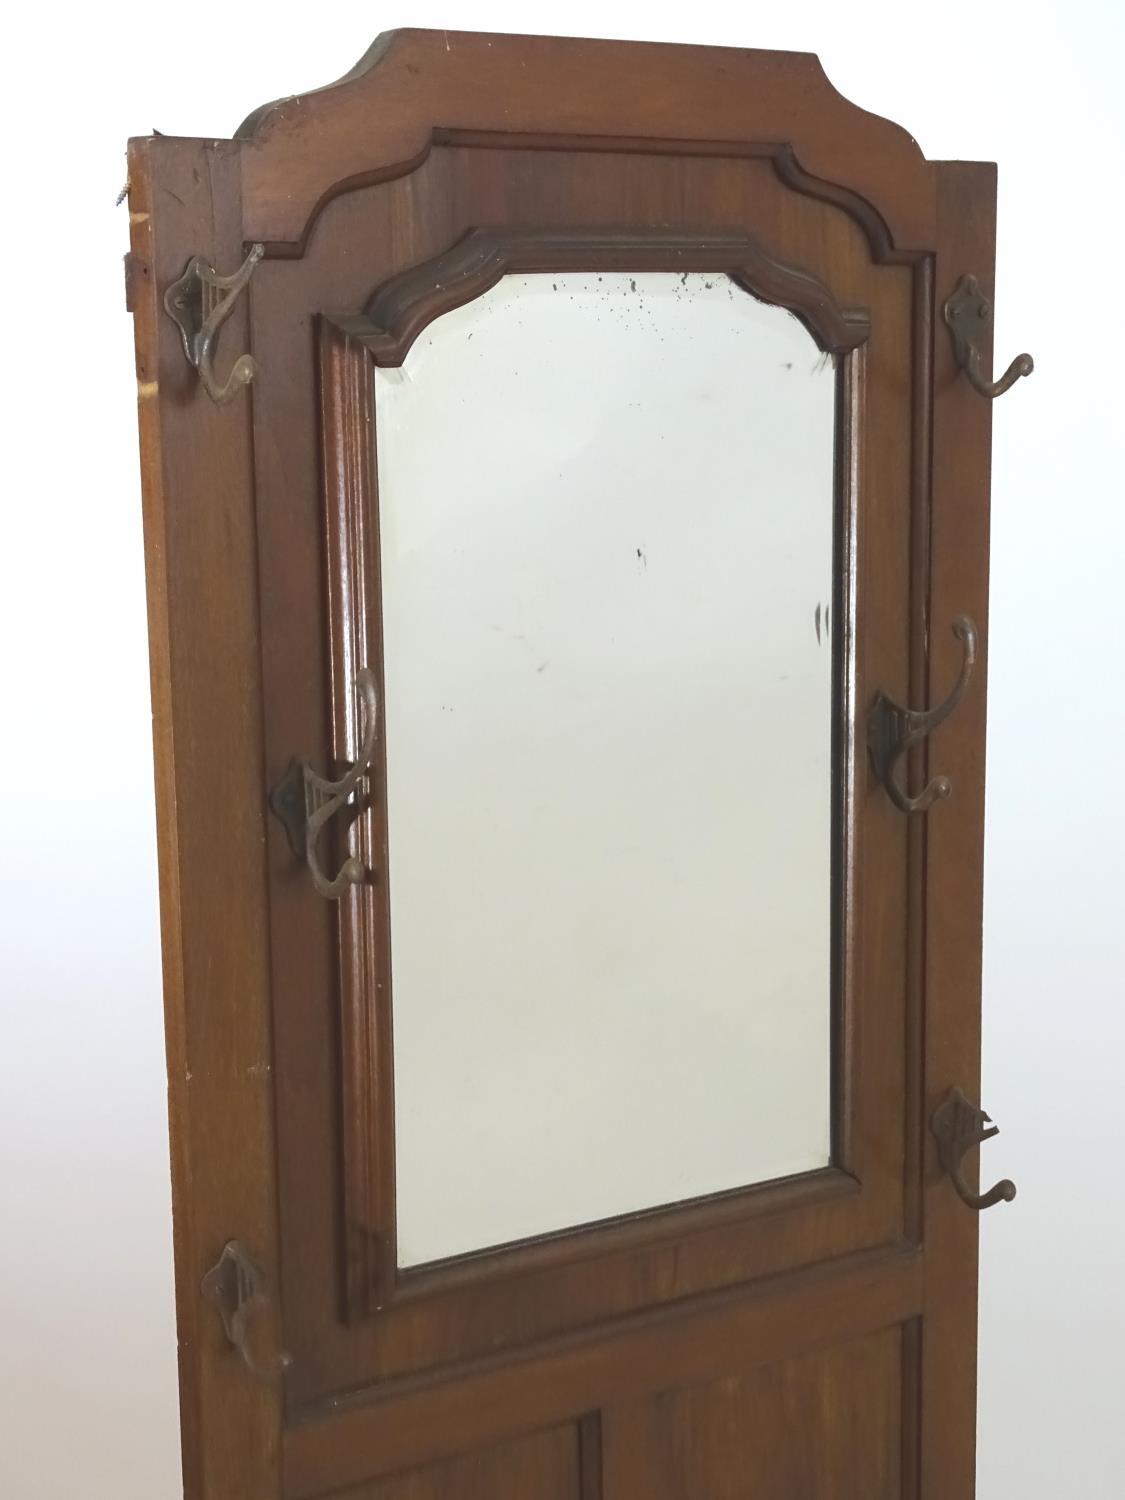 An early 20thC mahogany hall stand with a central bevelled mirror surrounded by ogee mouldings, - Image 4 of 4